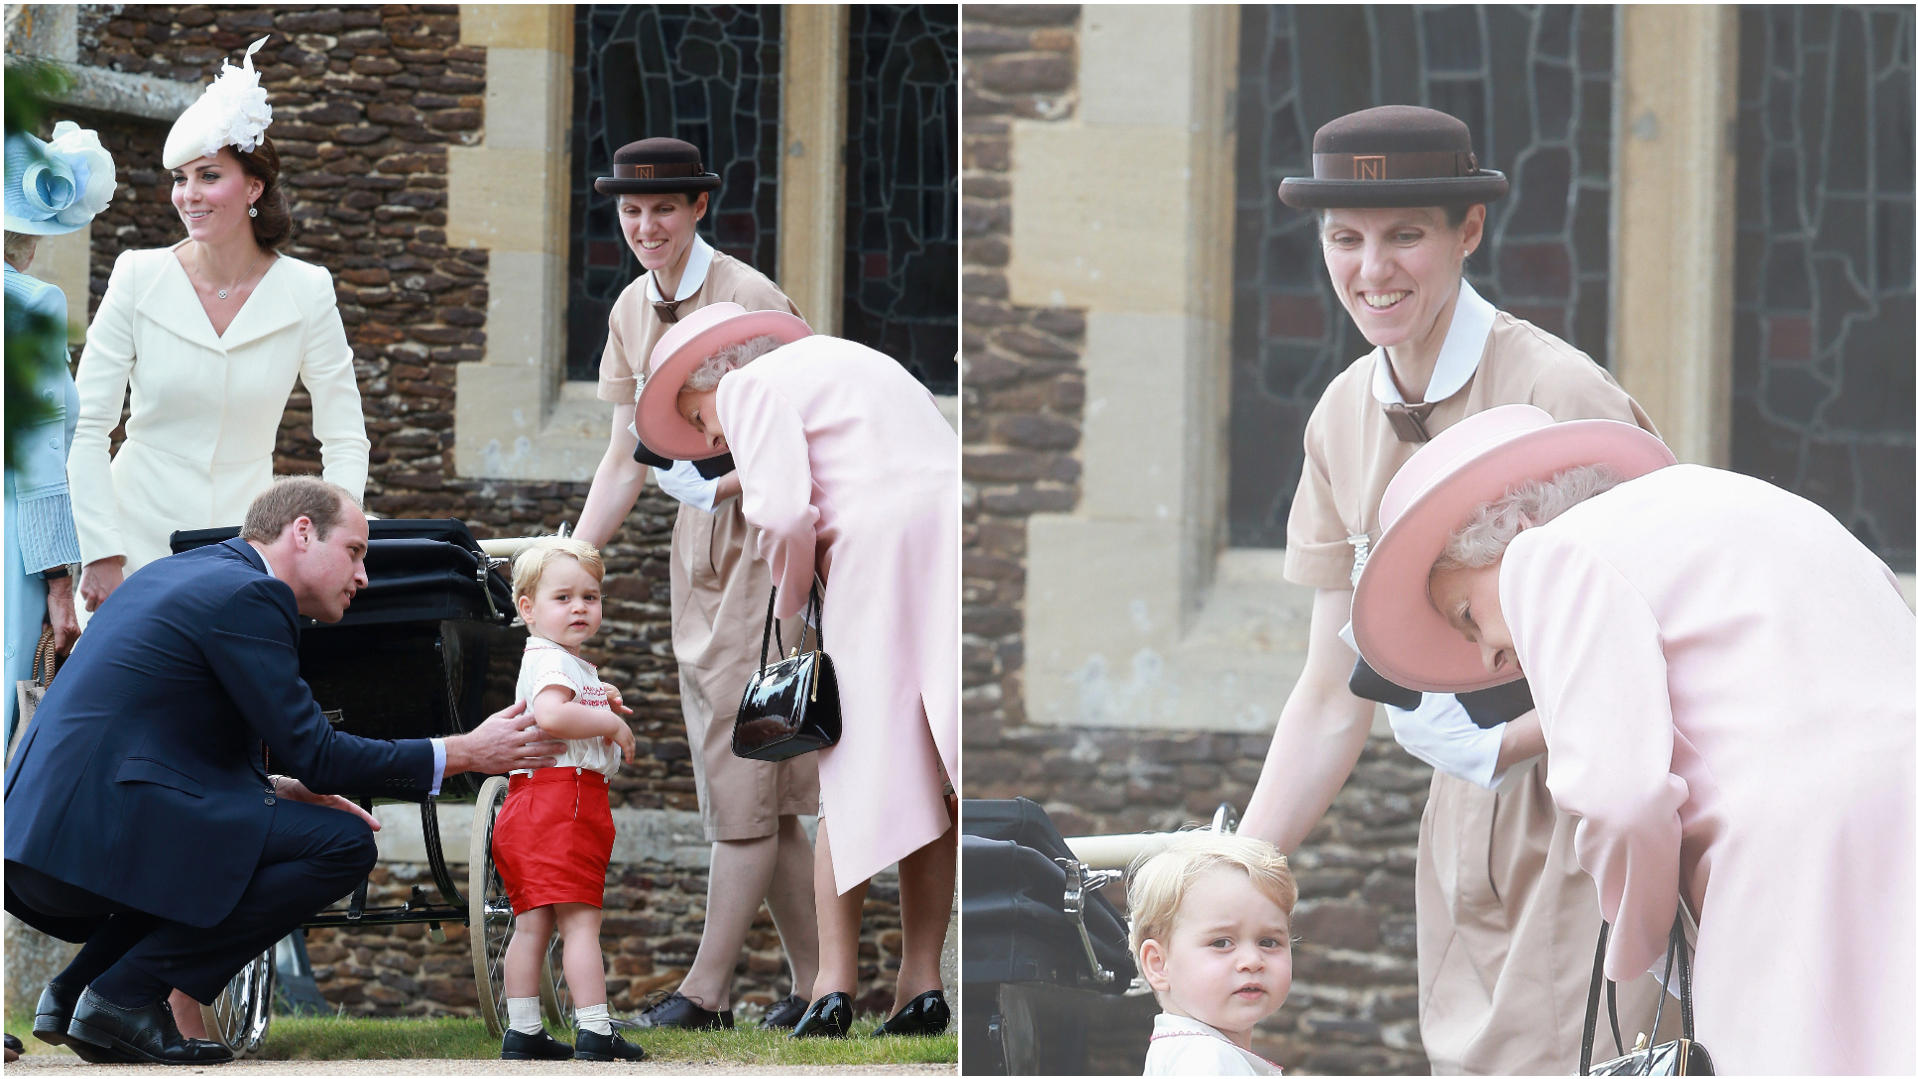 Royal nanny Maria Teresa Turrion Borrallo leave the Church of St Mary Magdalene on the Sandringham Estate after the Christening of Princess Charlotte of Cambridge on July 5, 2015 in King's Lynn, England.